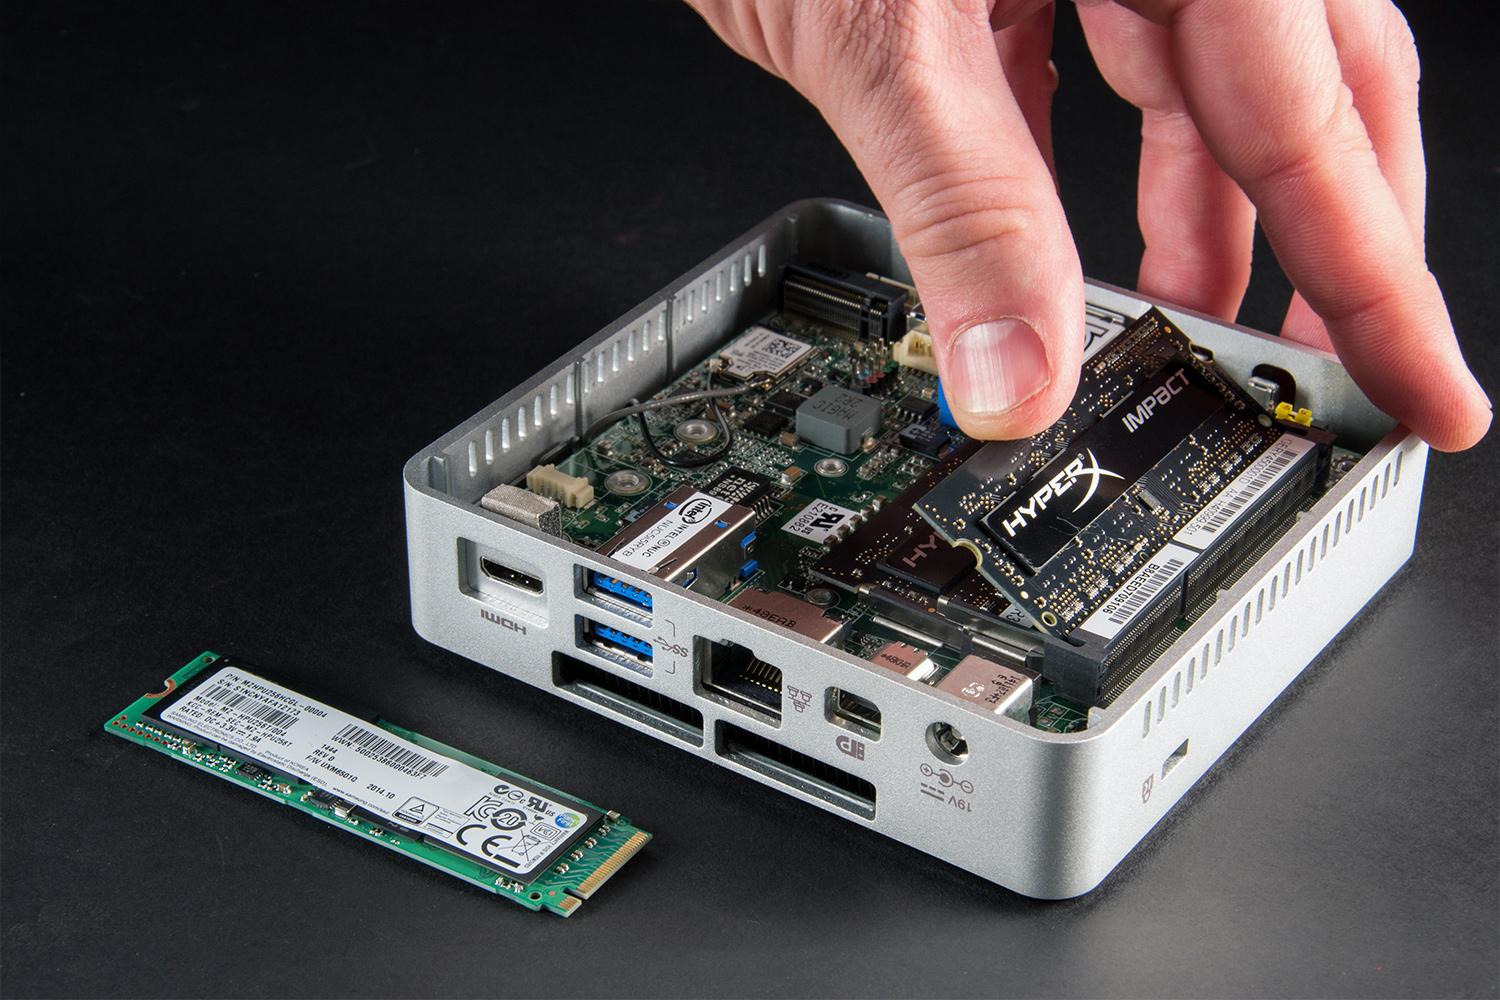 Want To Buy Intel's NUC? Here's What You Need To Know